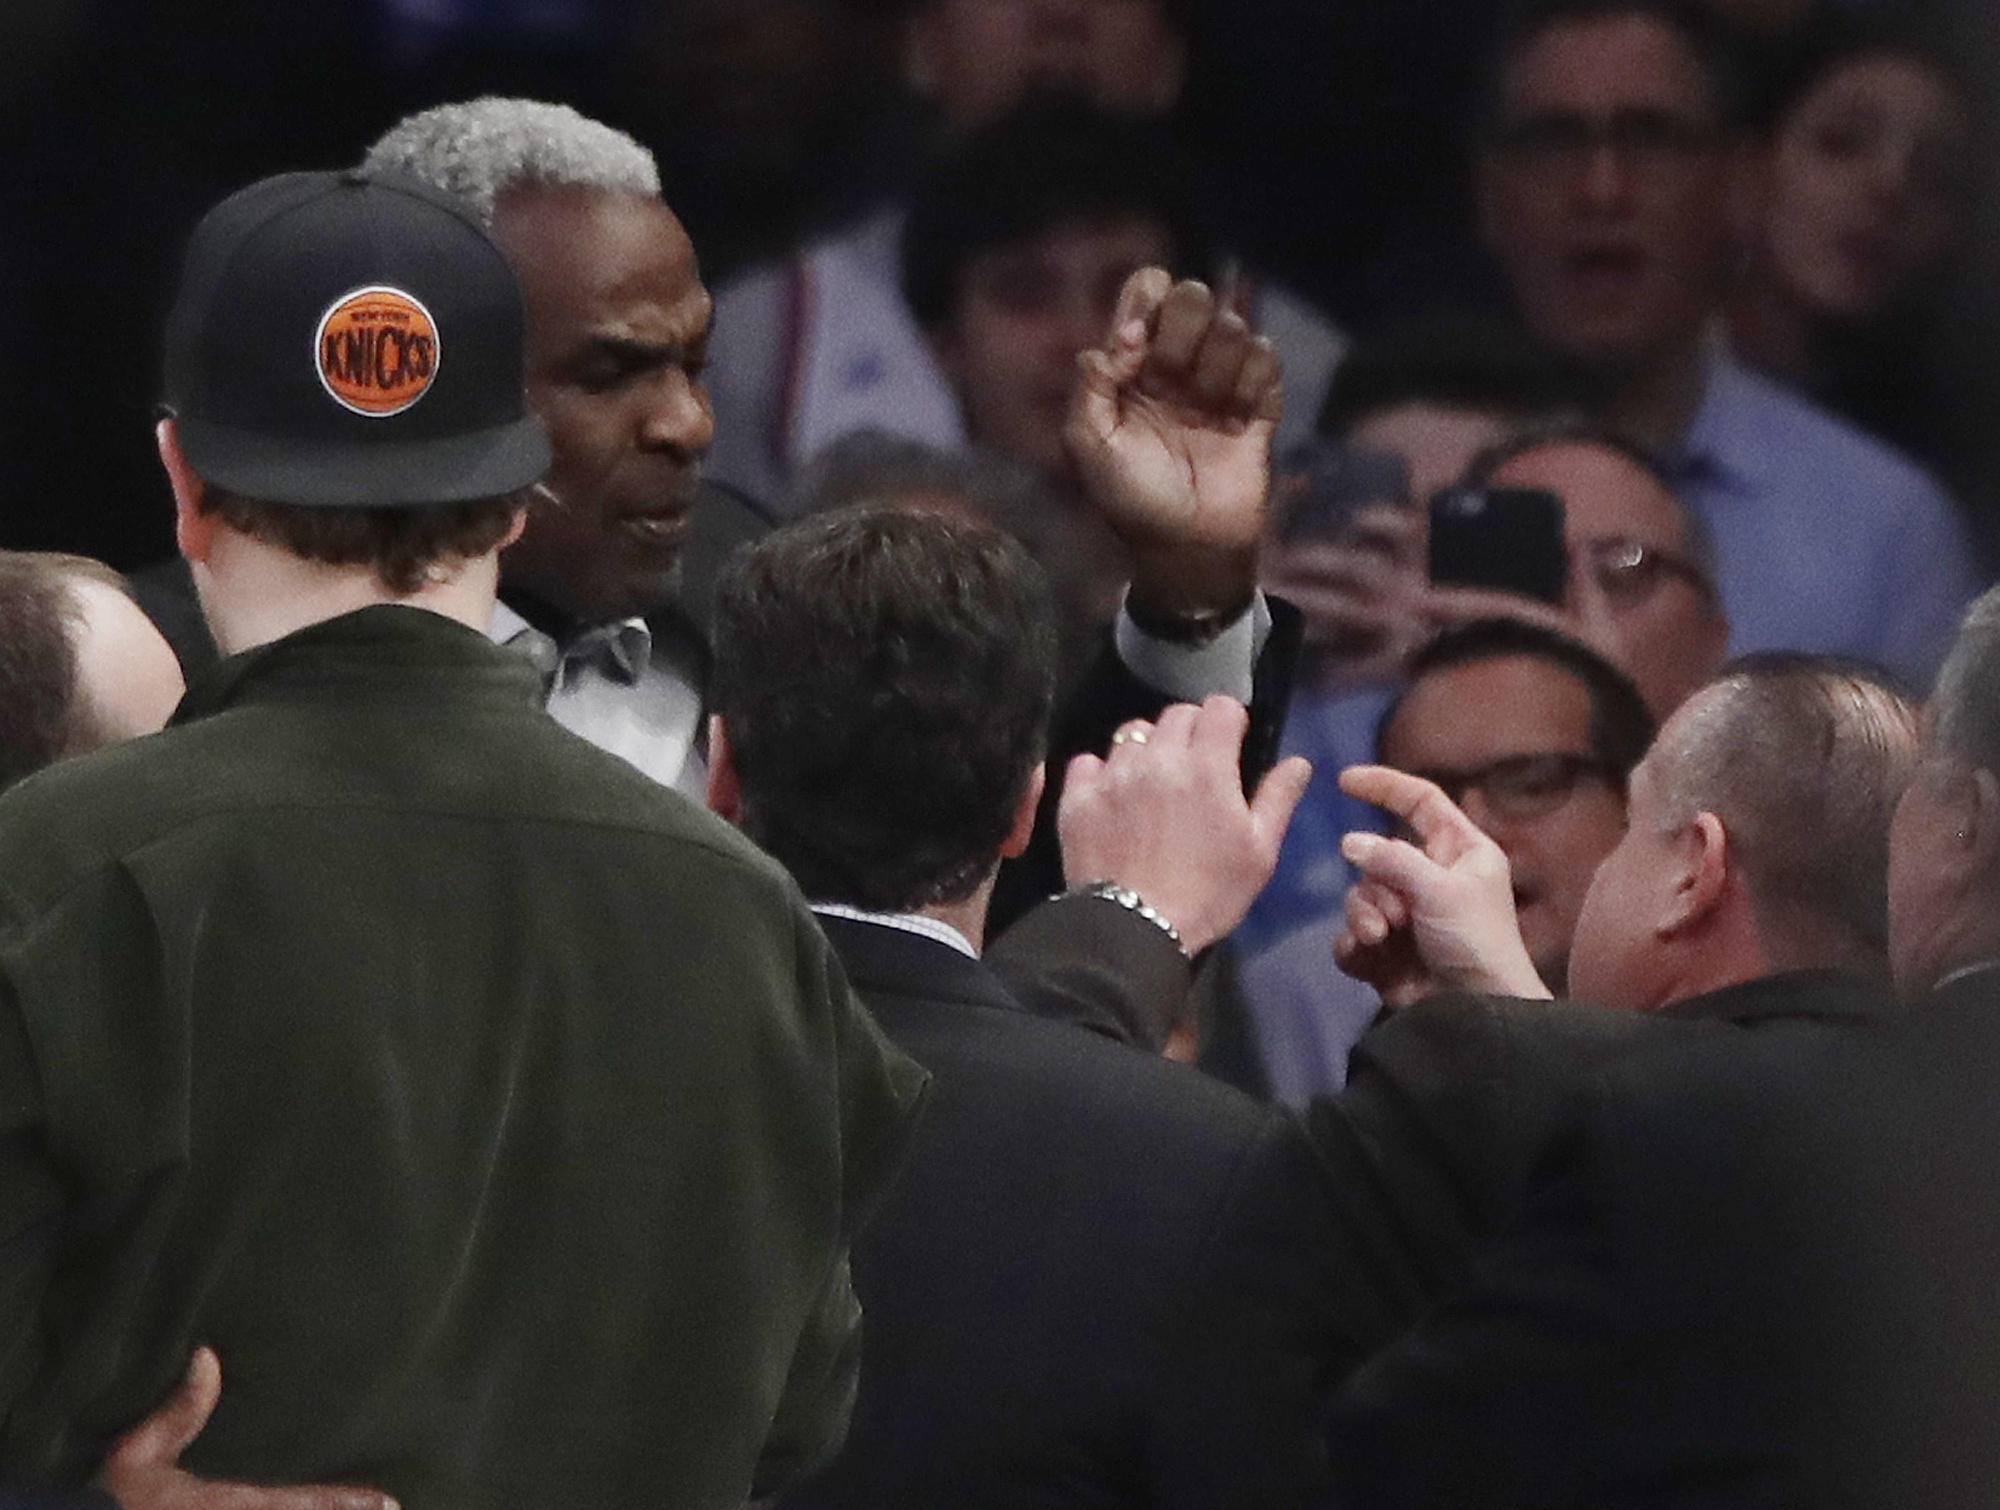 Former Knicks star Charles Oakley arrested after altercation at game - CBS News2000 x 1510